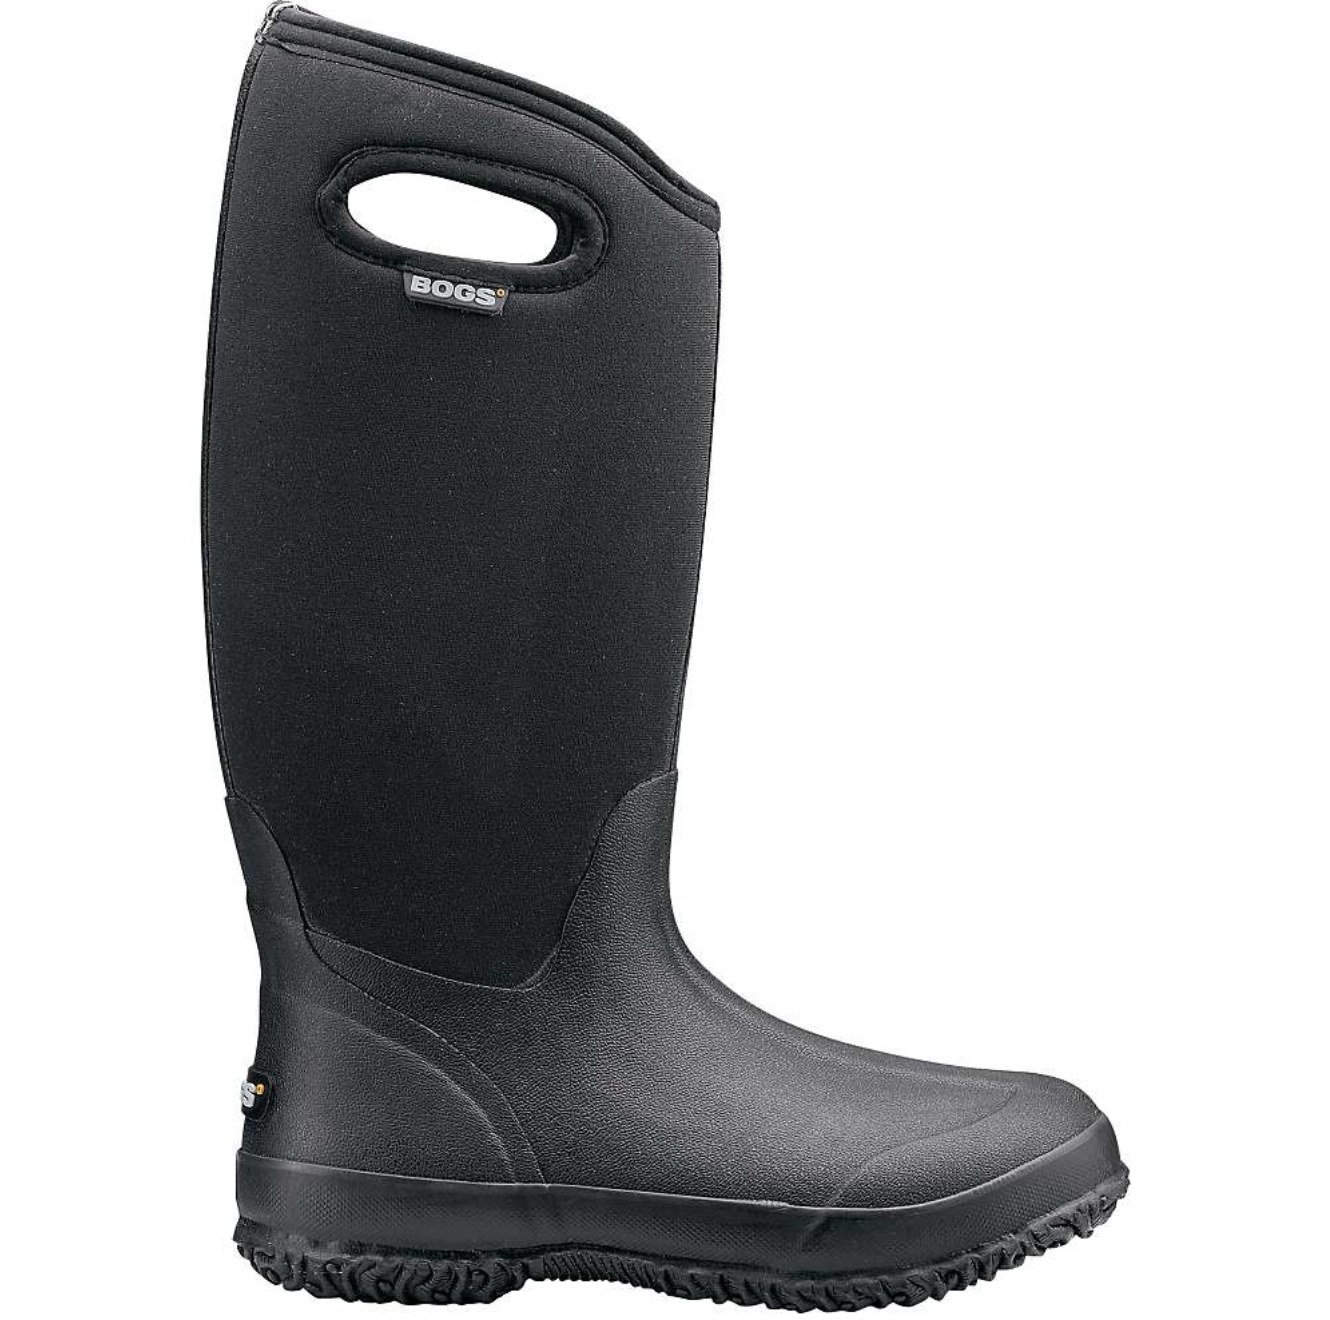 A black boot with handles at the top